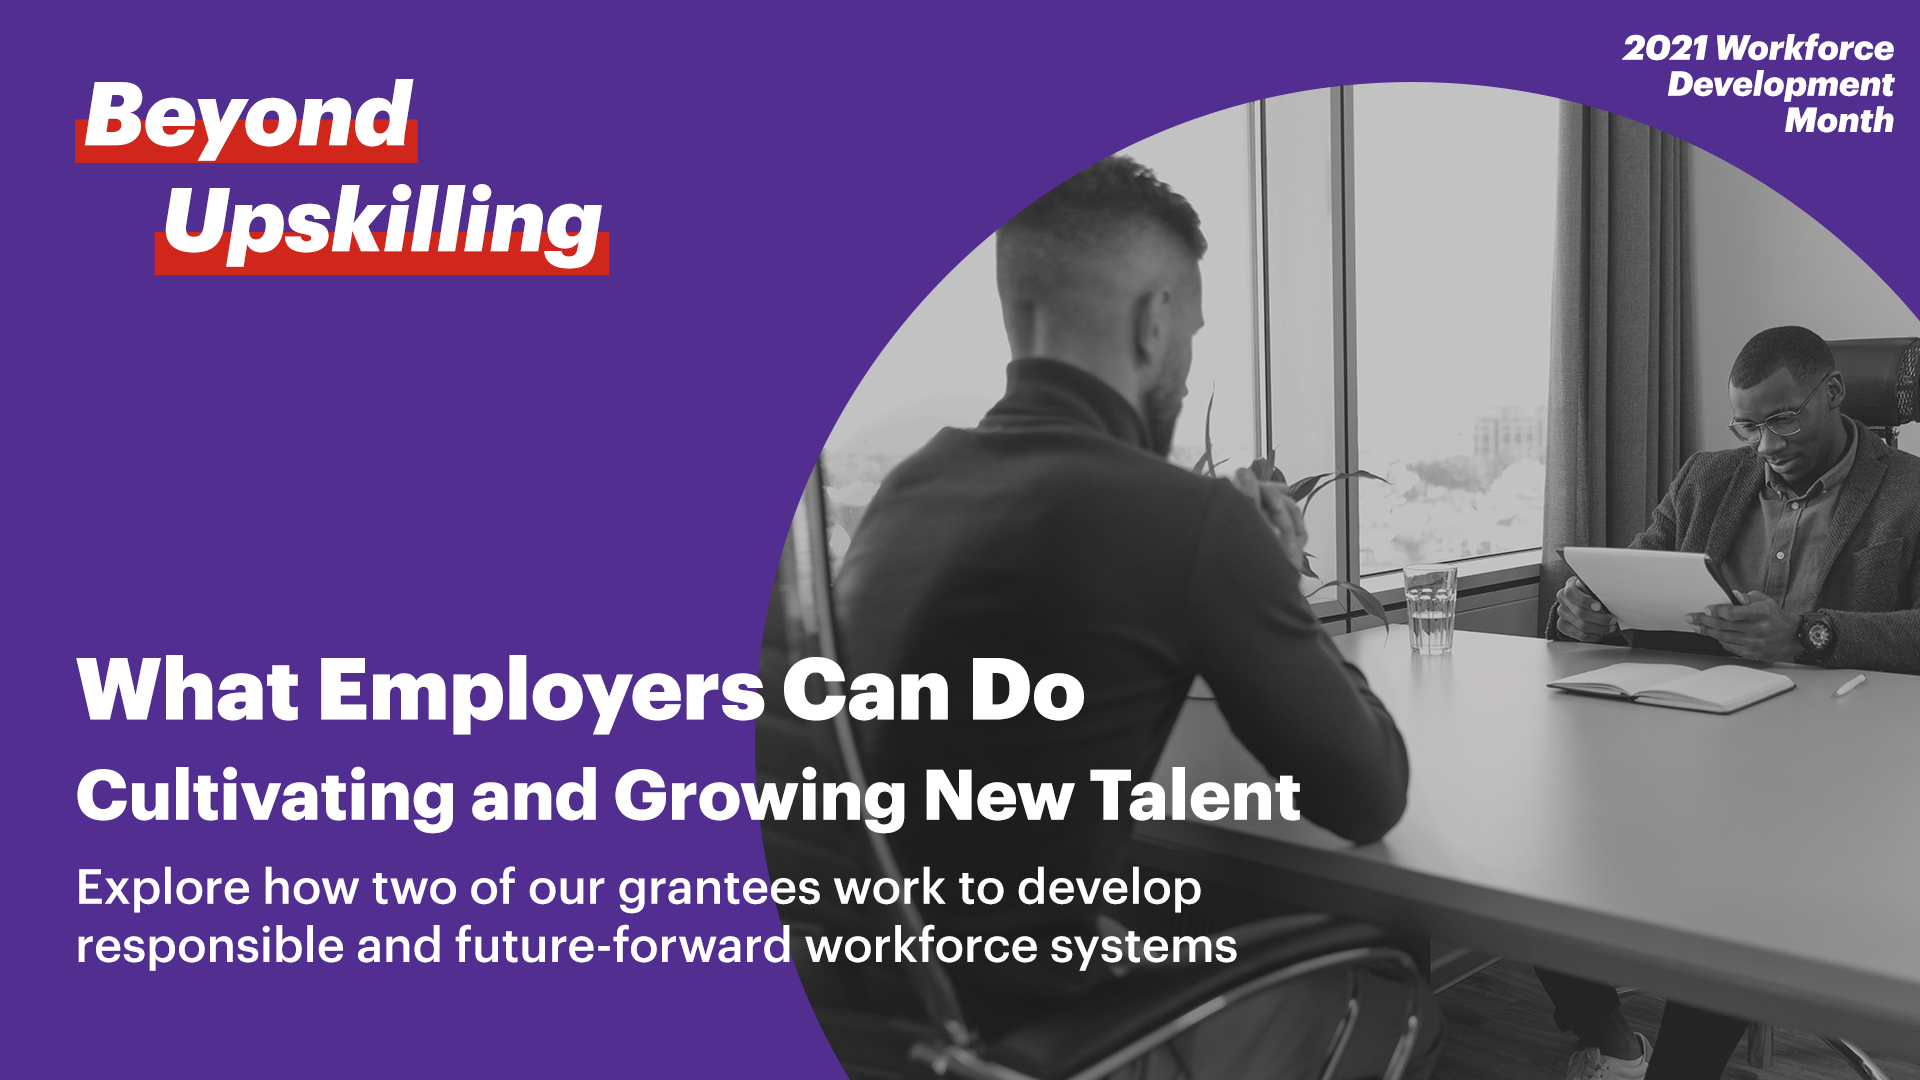 Upskilling: What Employers Can Do